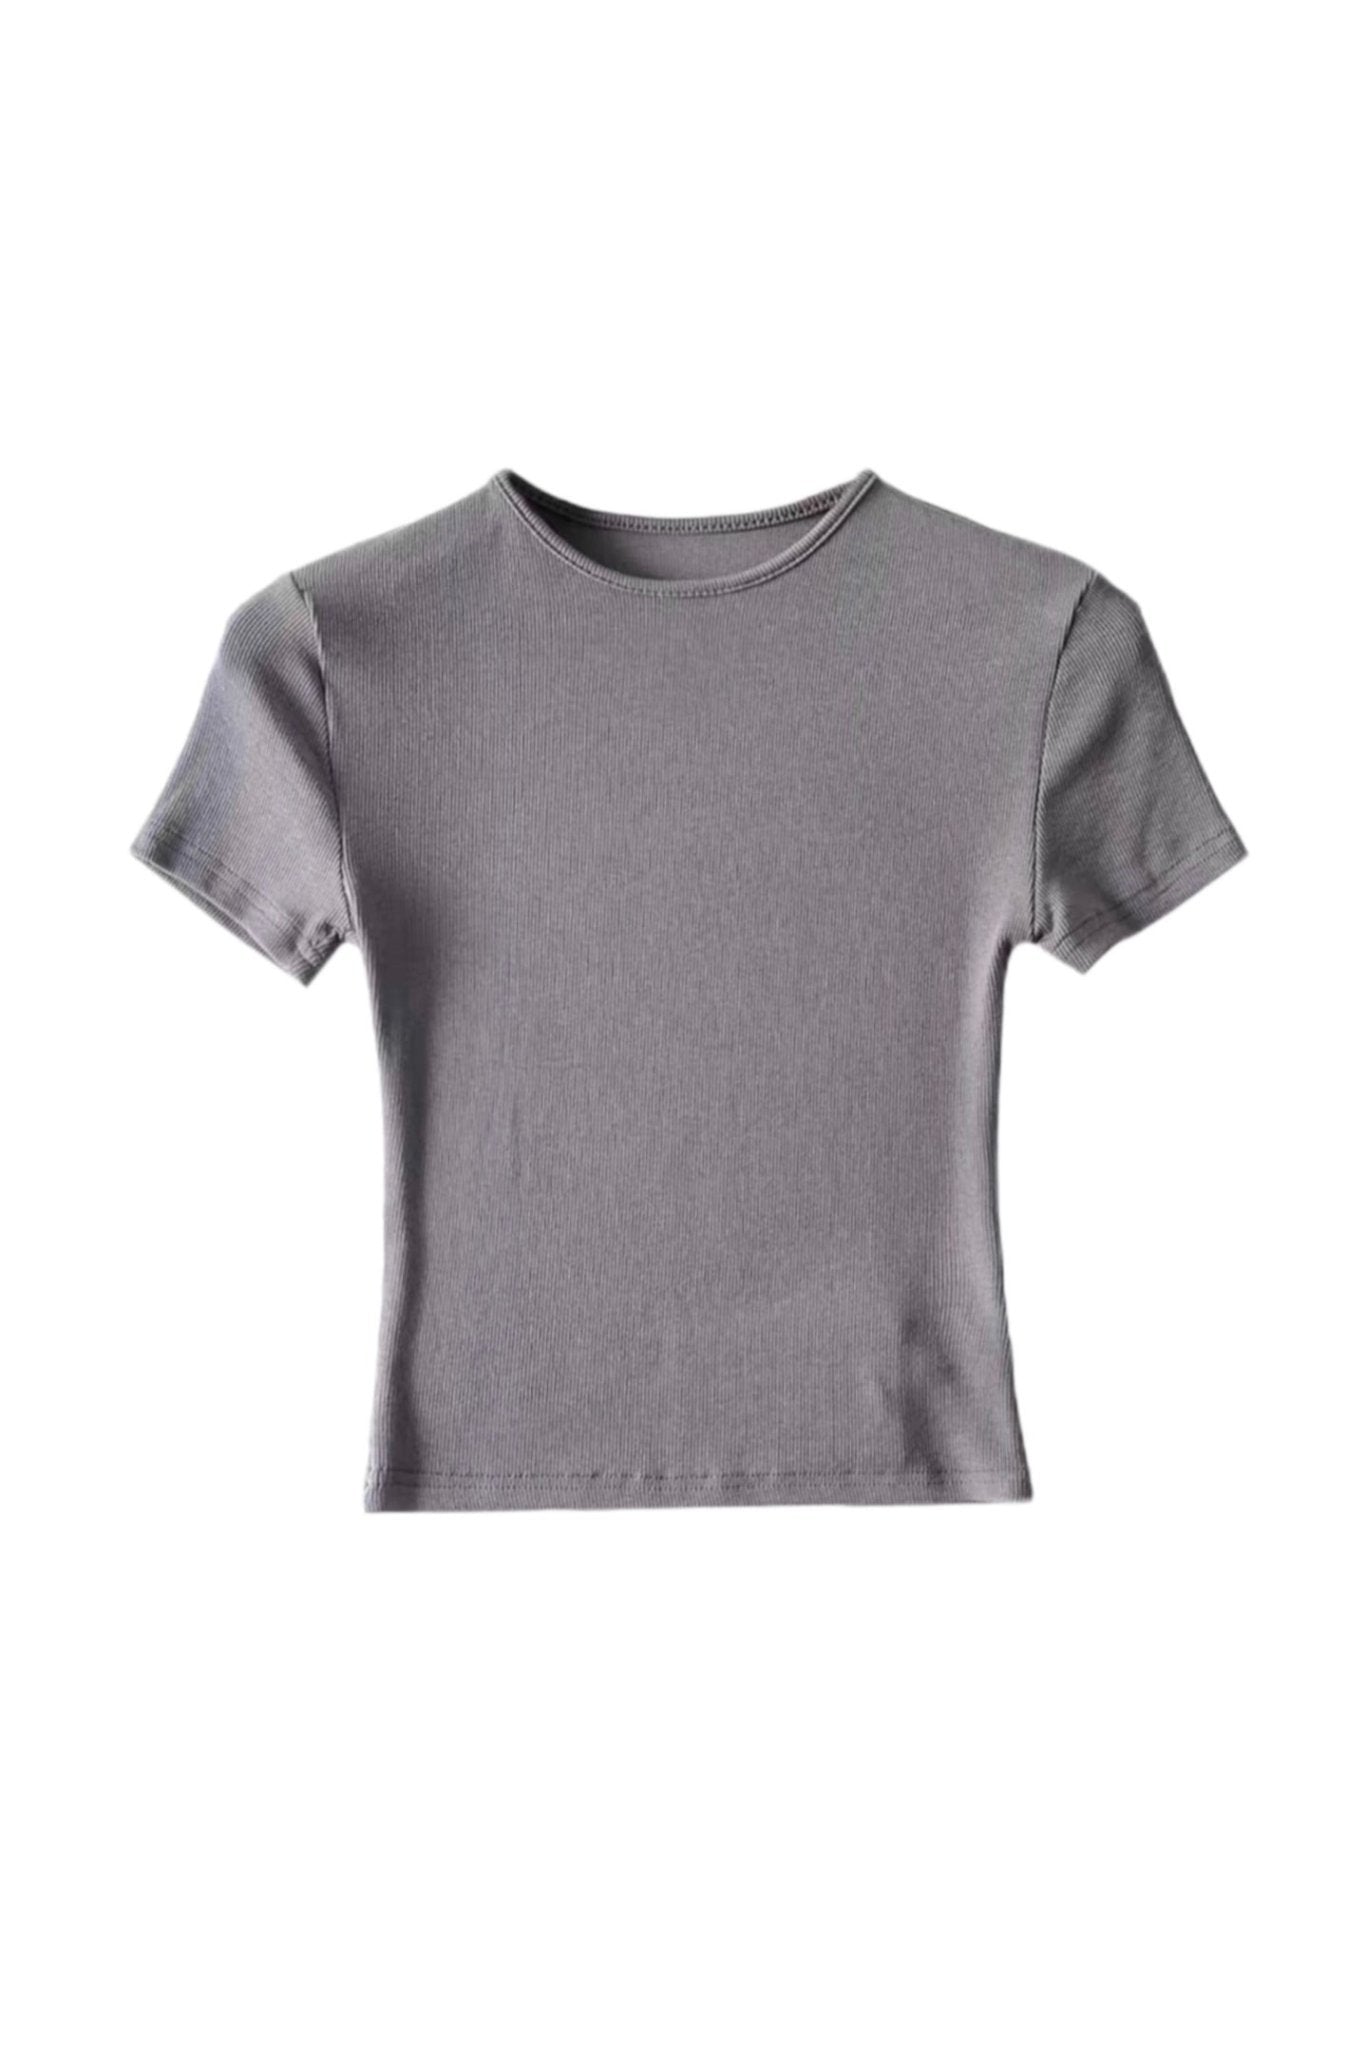 Basic daily baby tee - SCG_COLLECTIONSTop